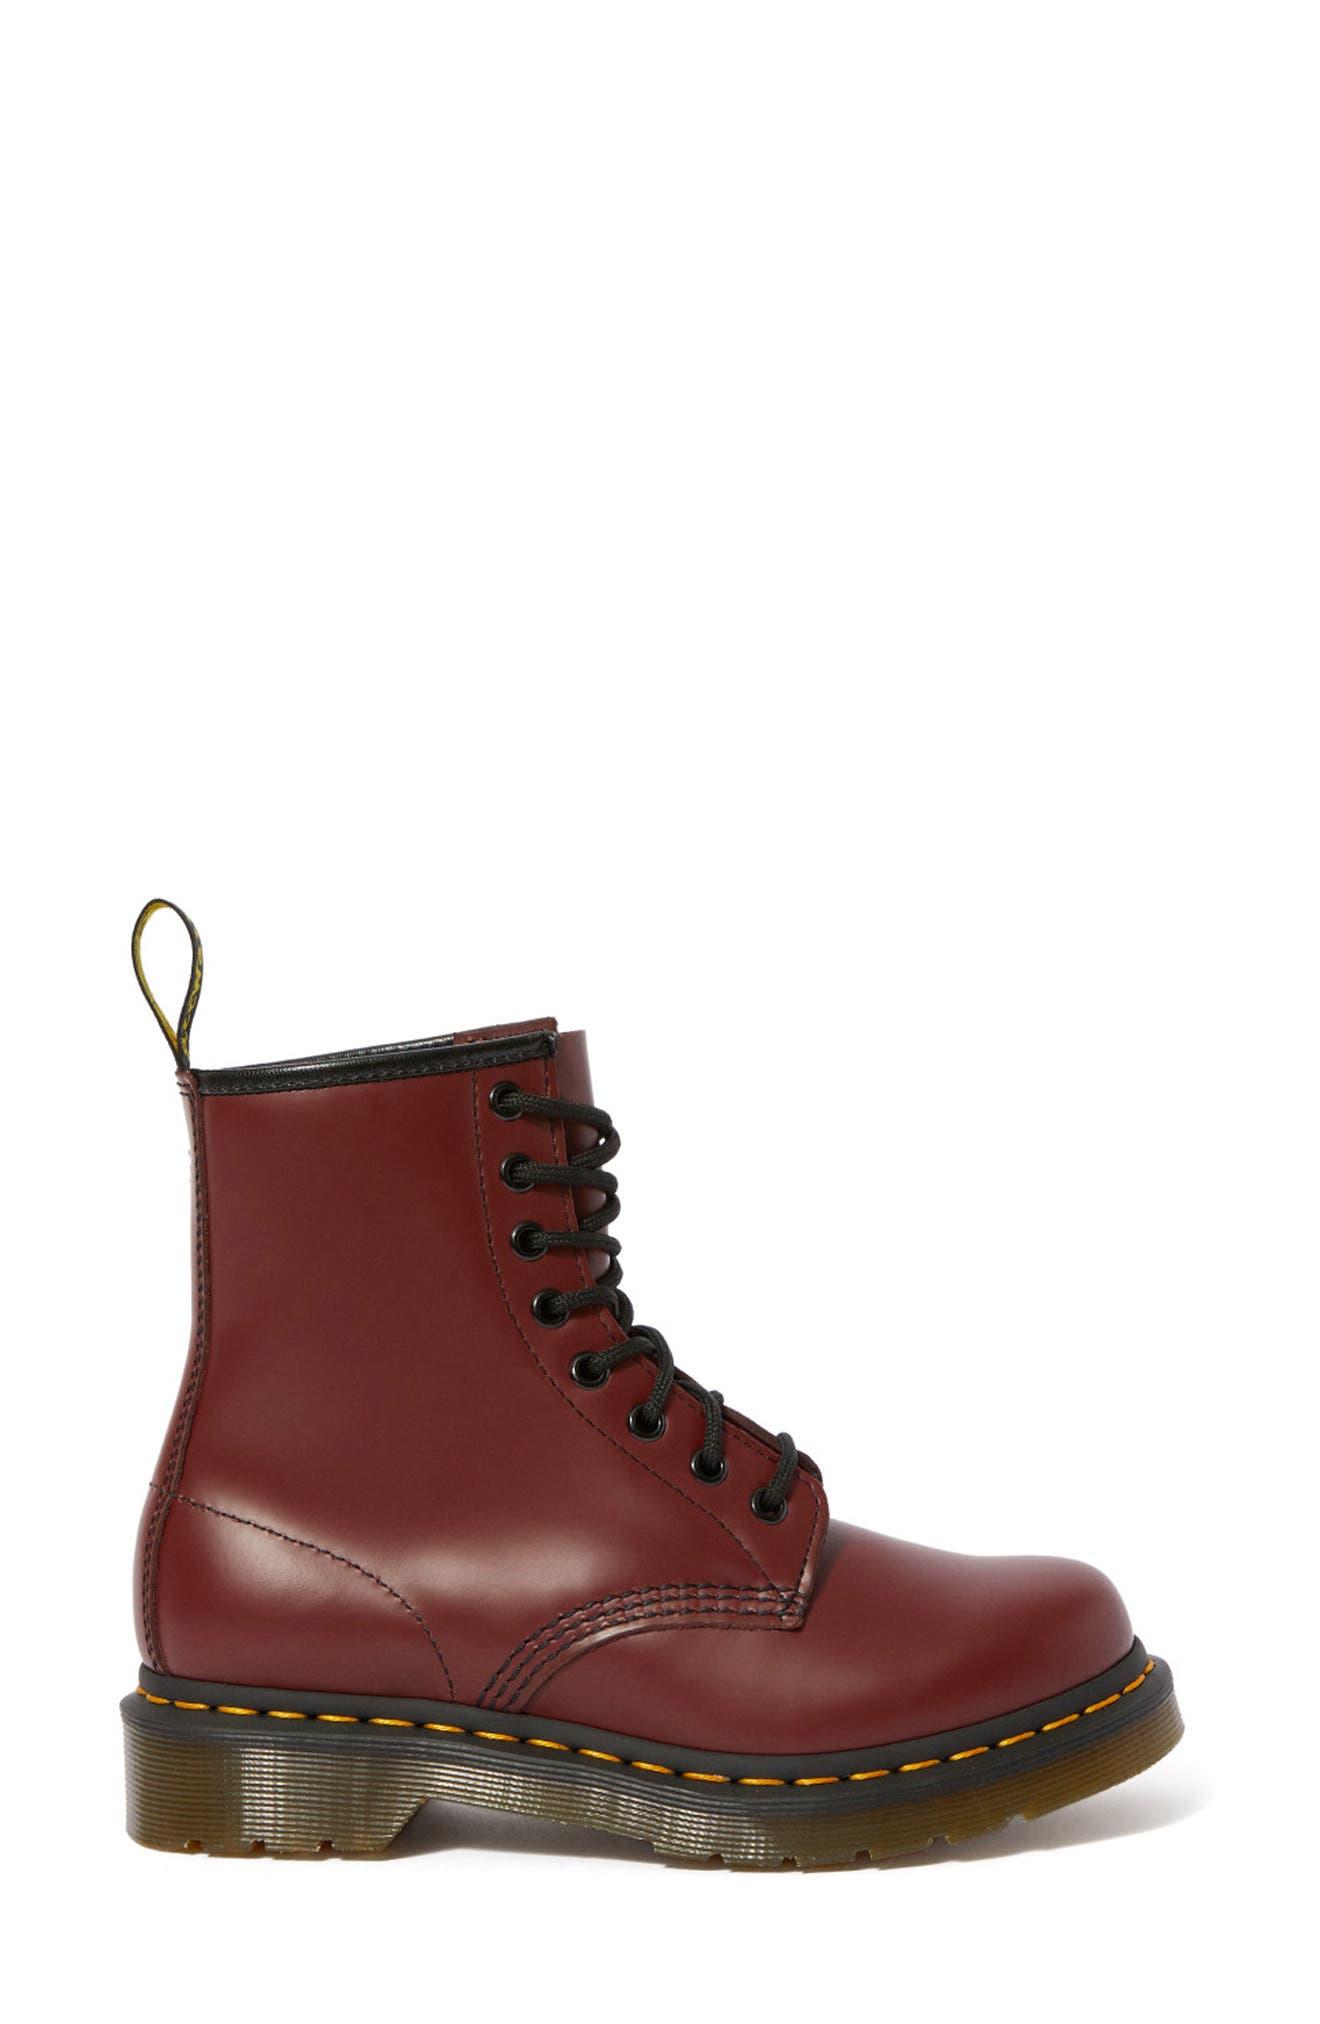 Dr. Martens 1460 W Boot In Cherry At Nordstrom Rack in Brown | Lyst